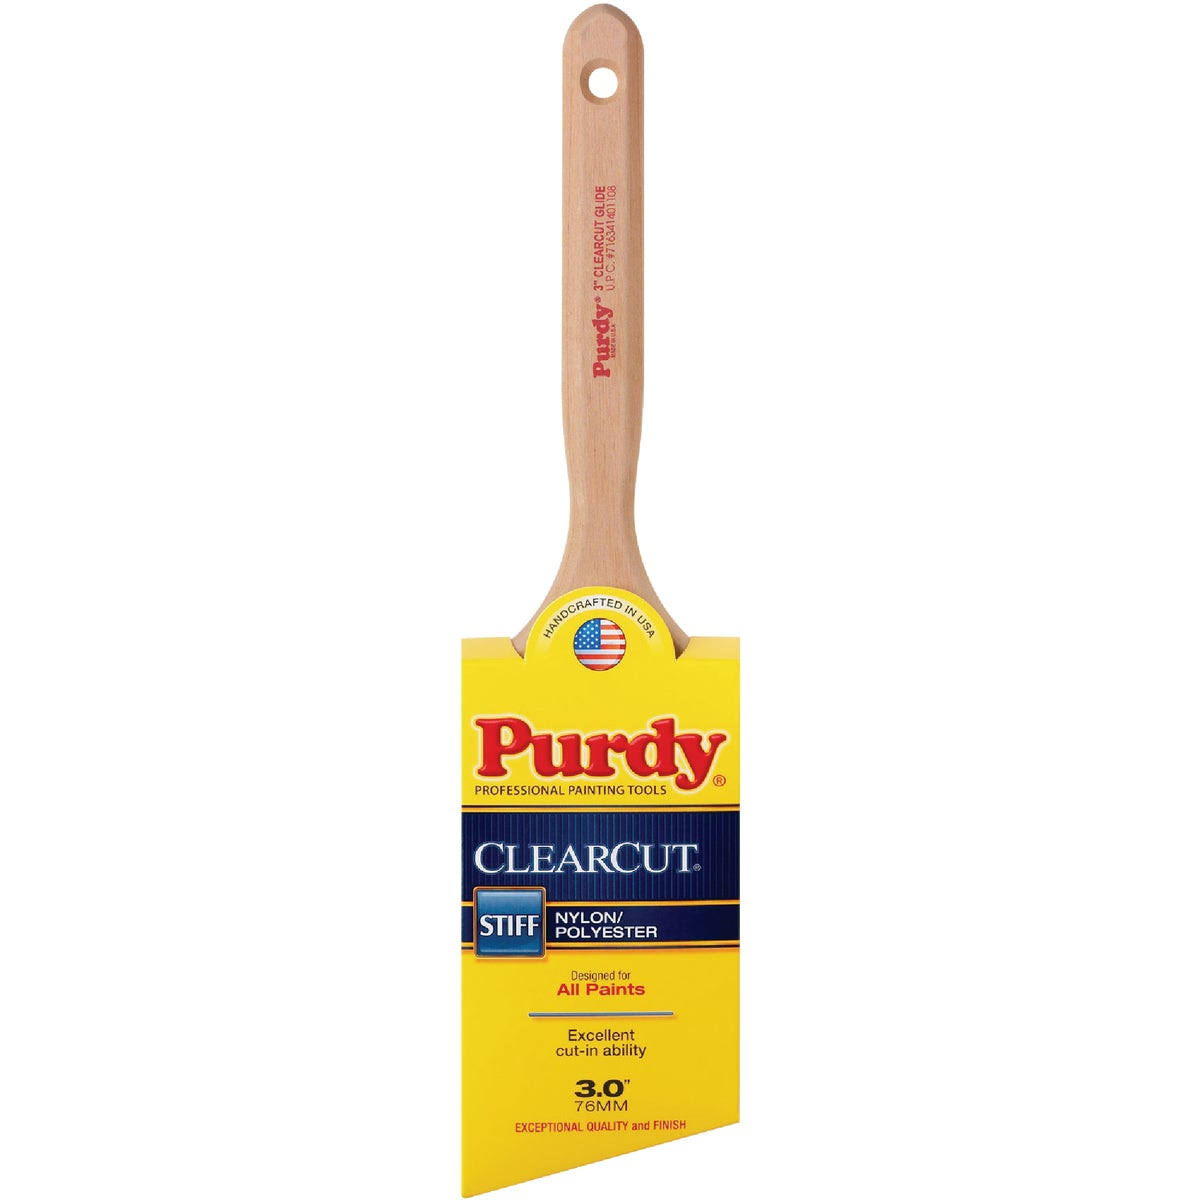 Purdy ClearCut Paint Brush - 3"